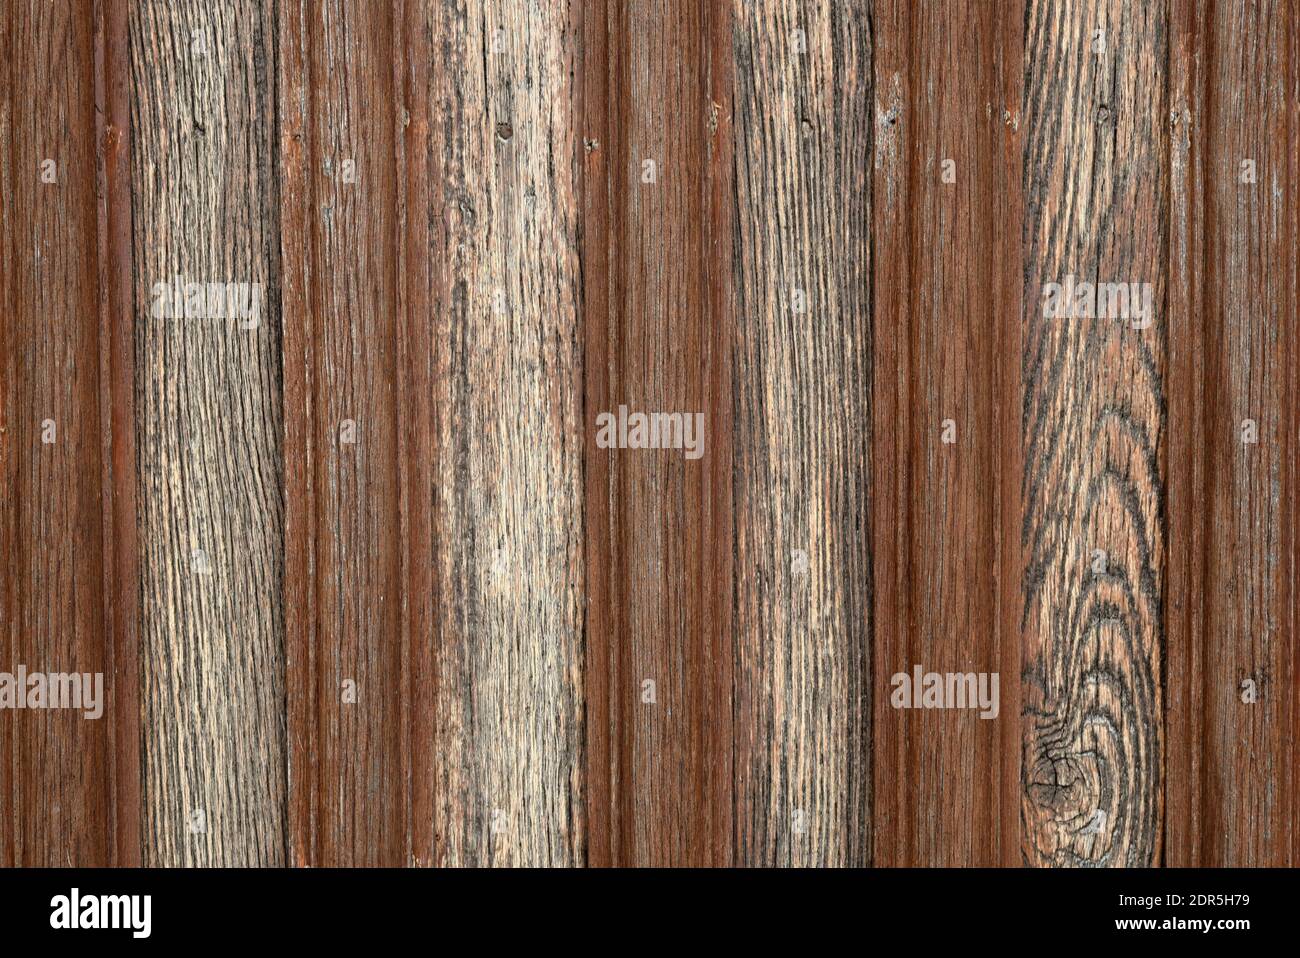 Close-up of old wooden door background with vertical lines Stock Photo